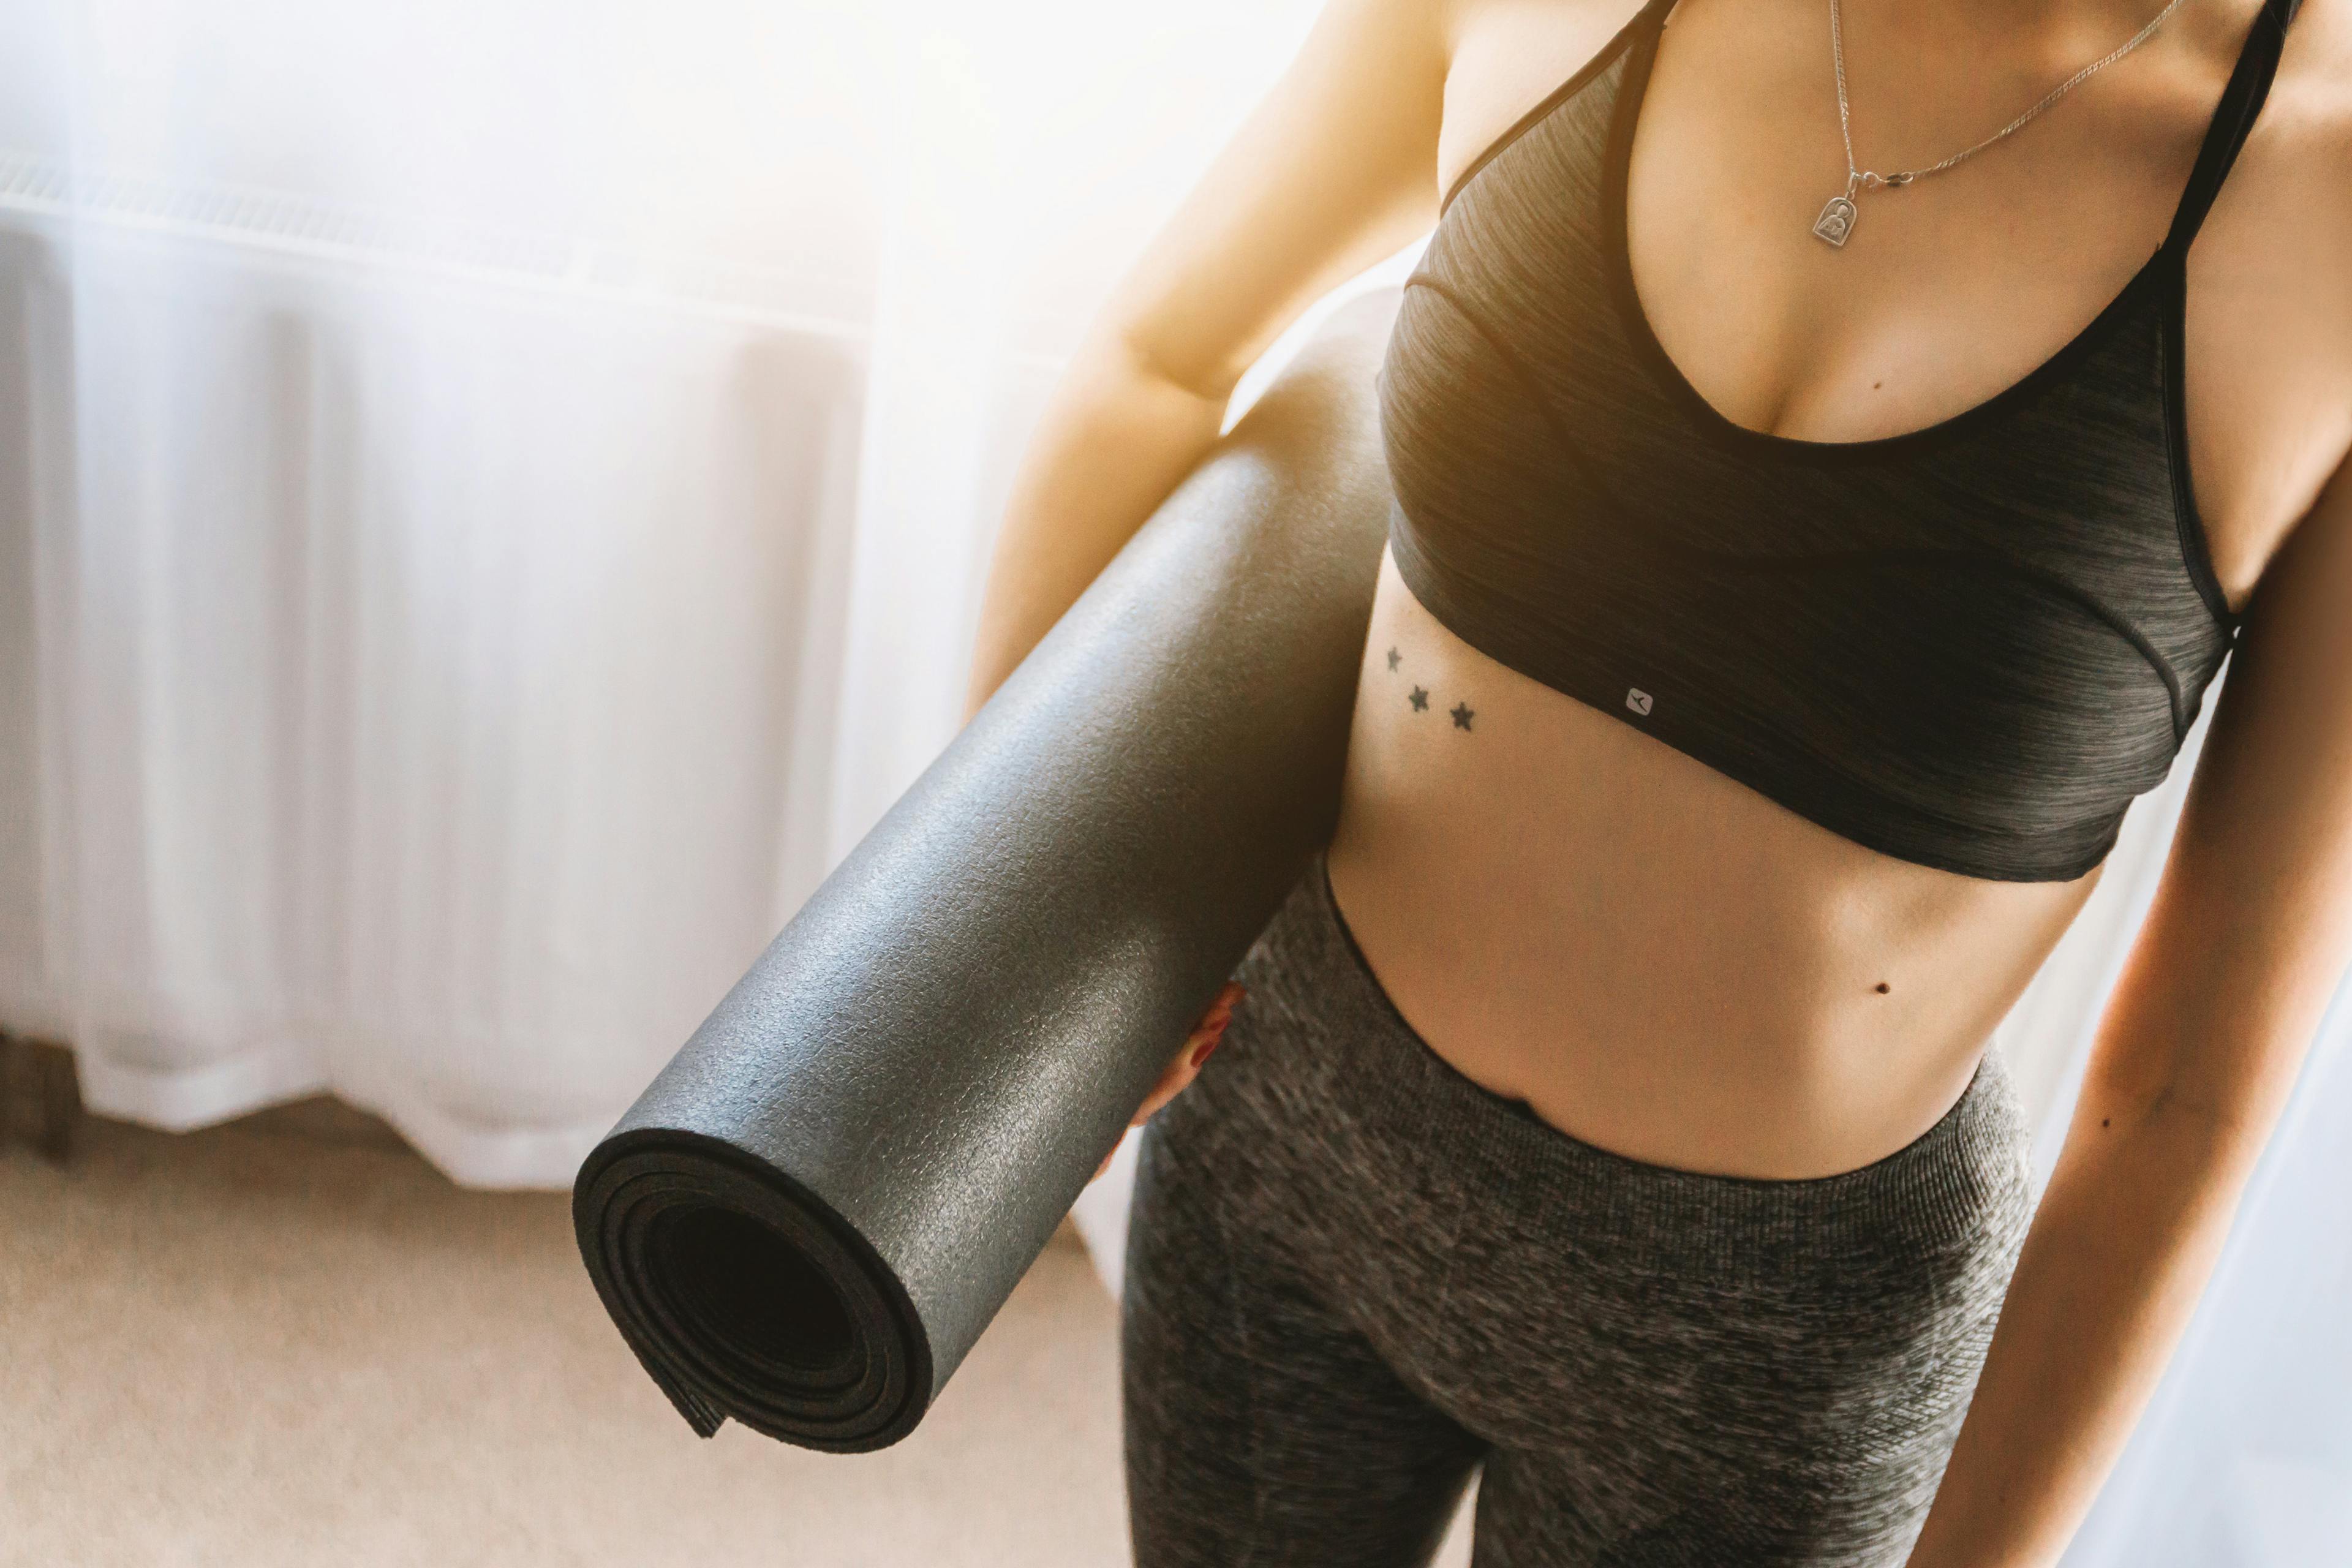 Don’t have workout equipment at home? Try these household items instead. 